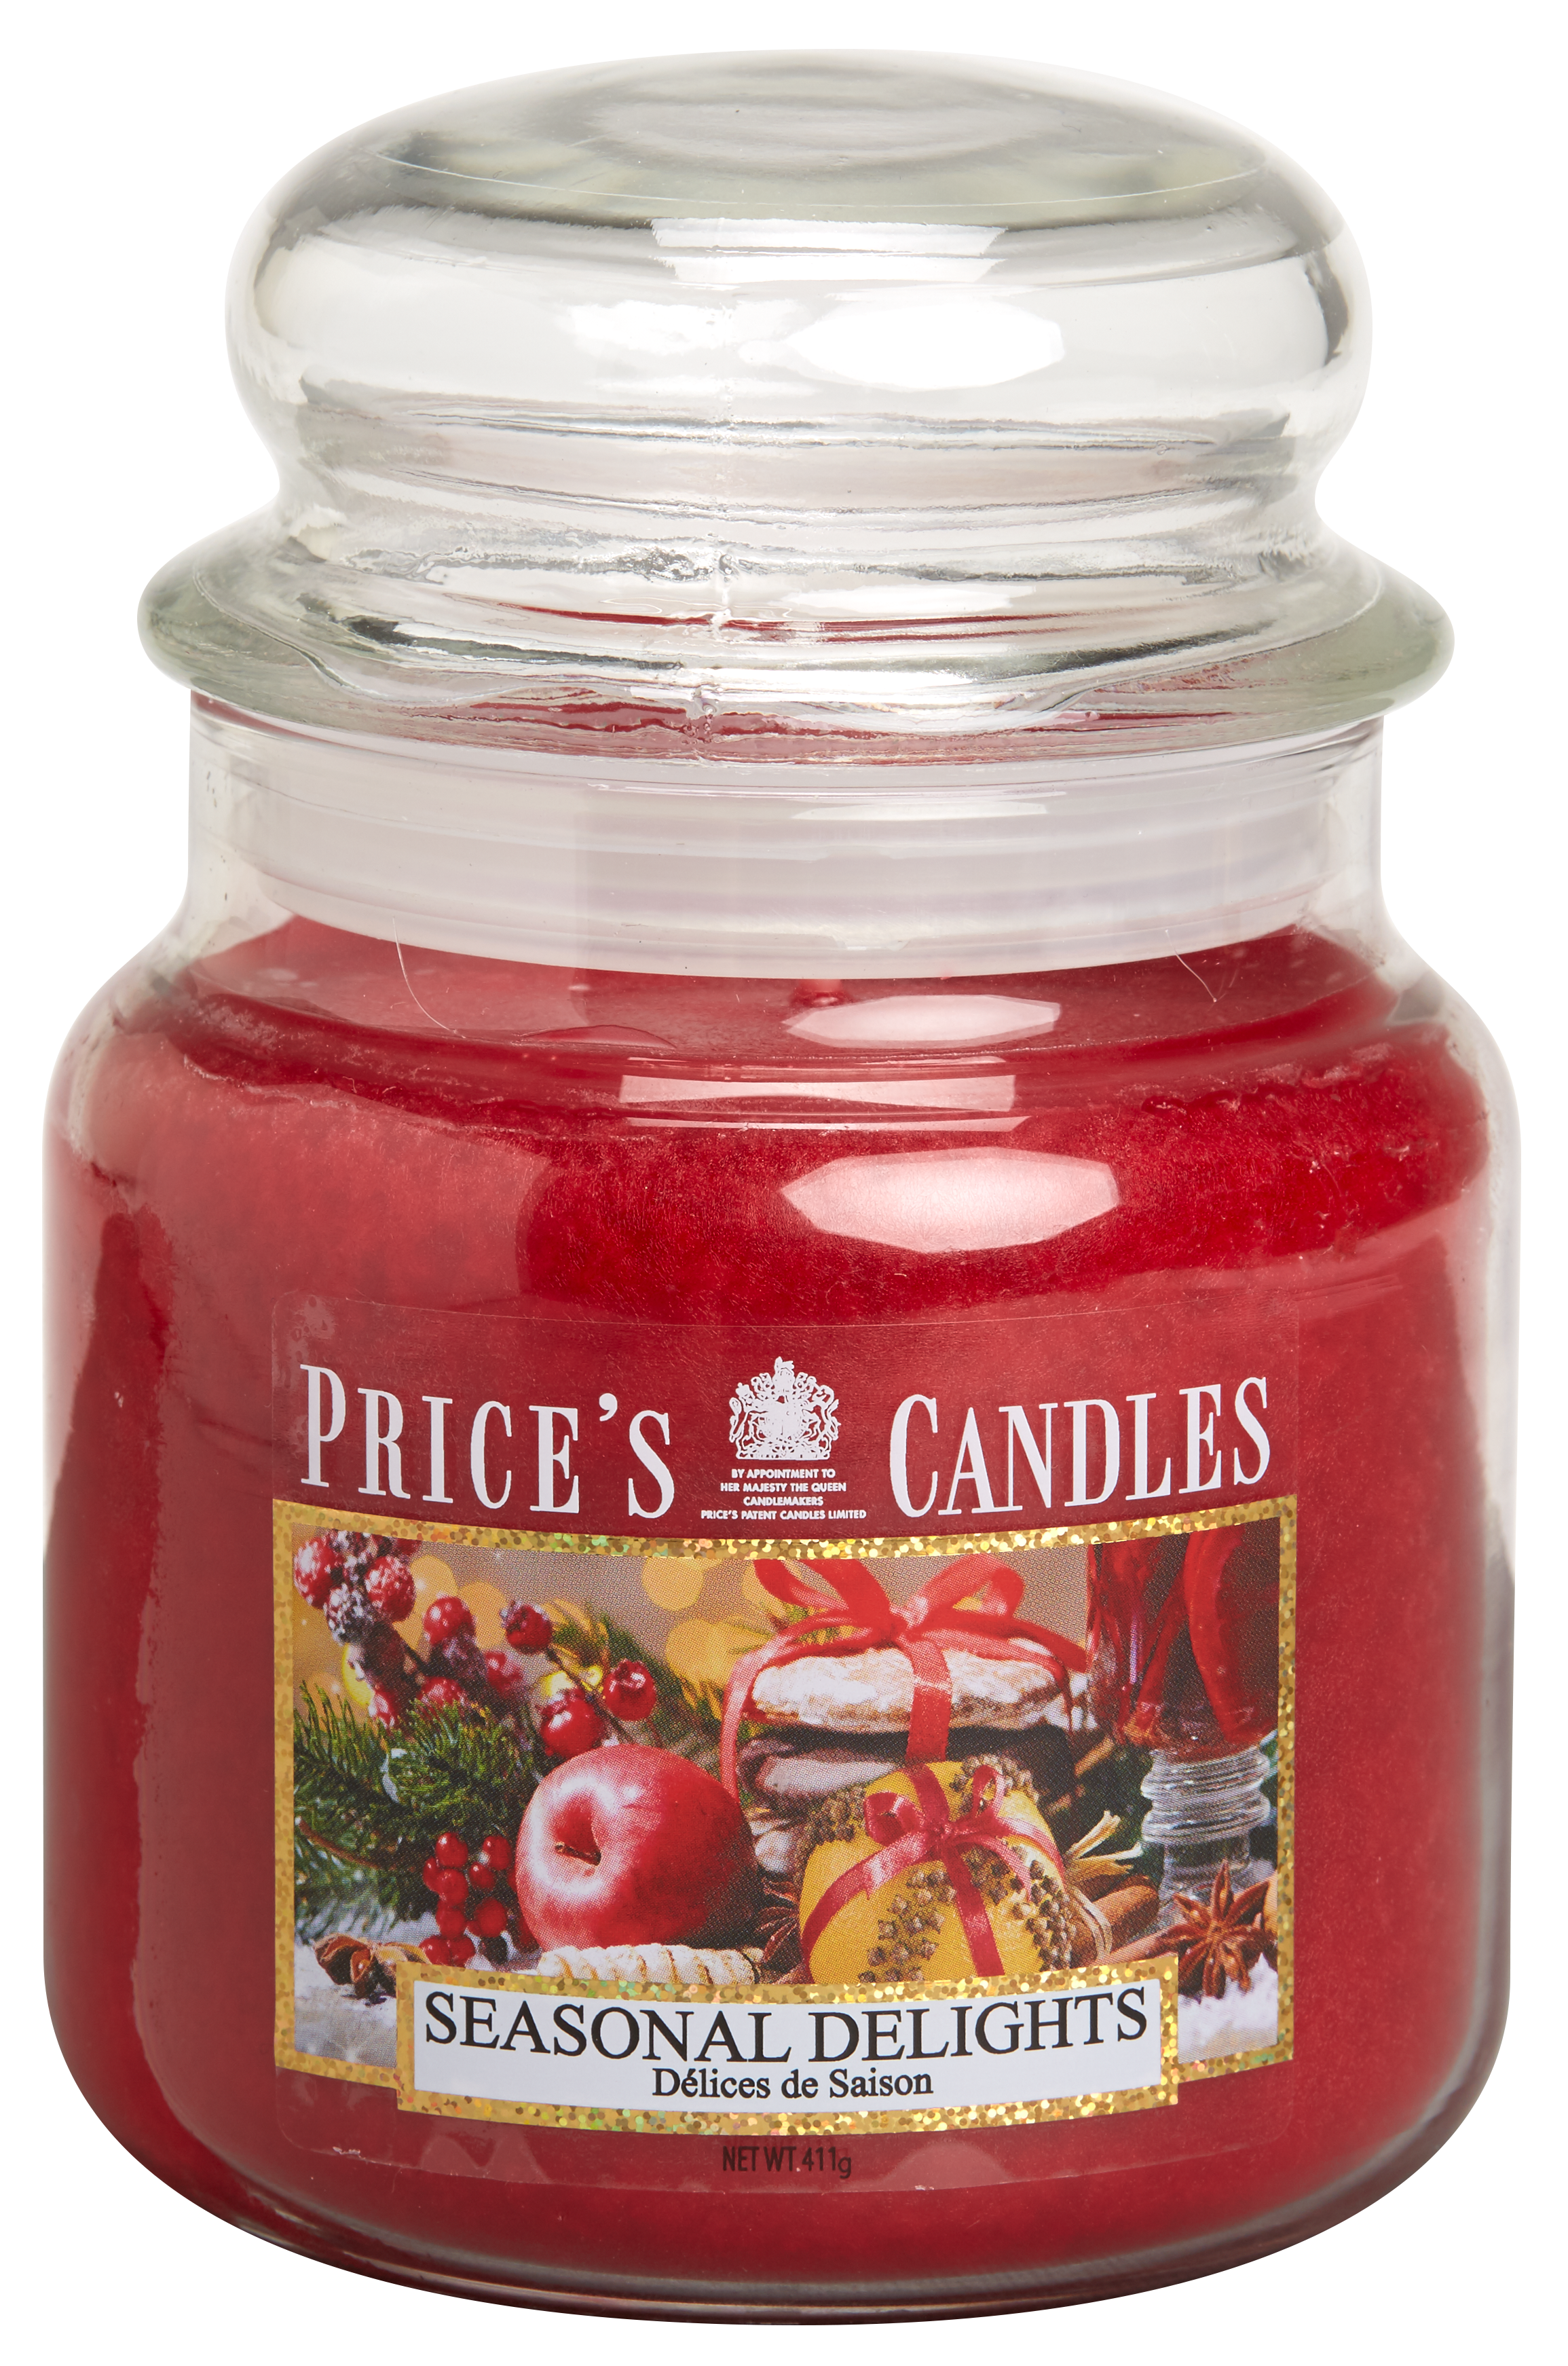 Prices Candle "Seasonal Delights" 411g 